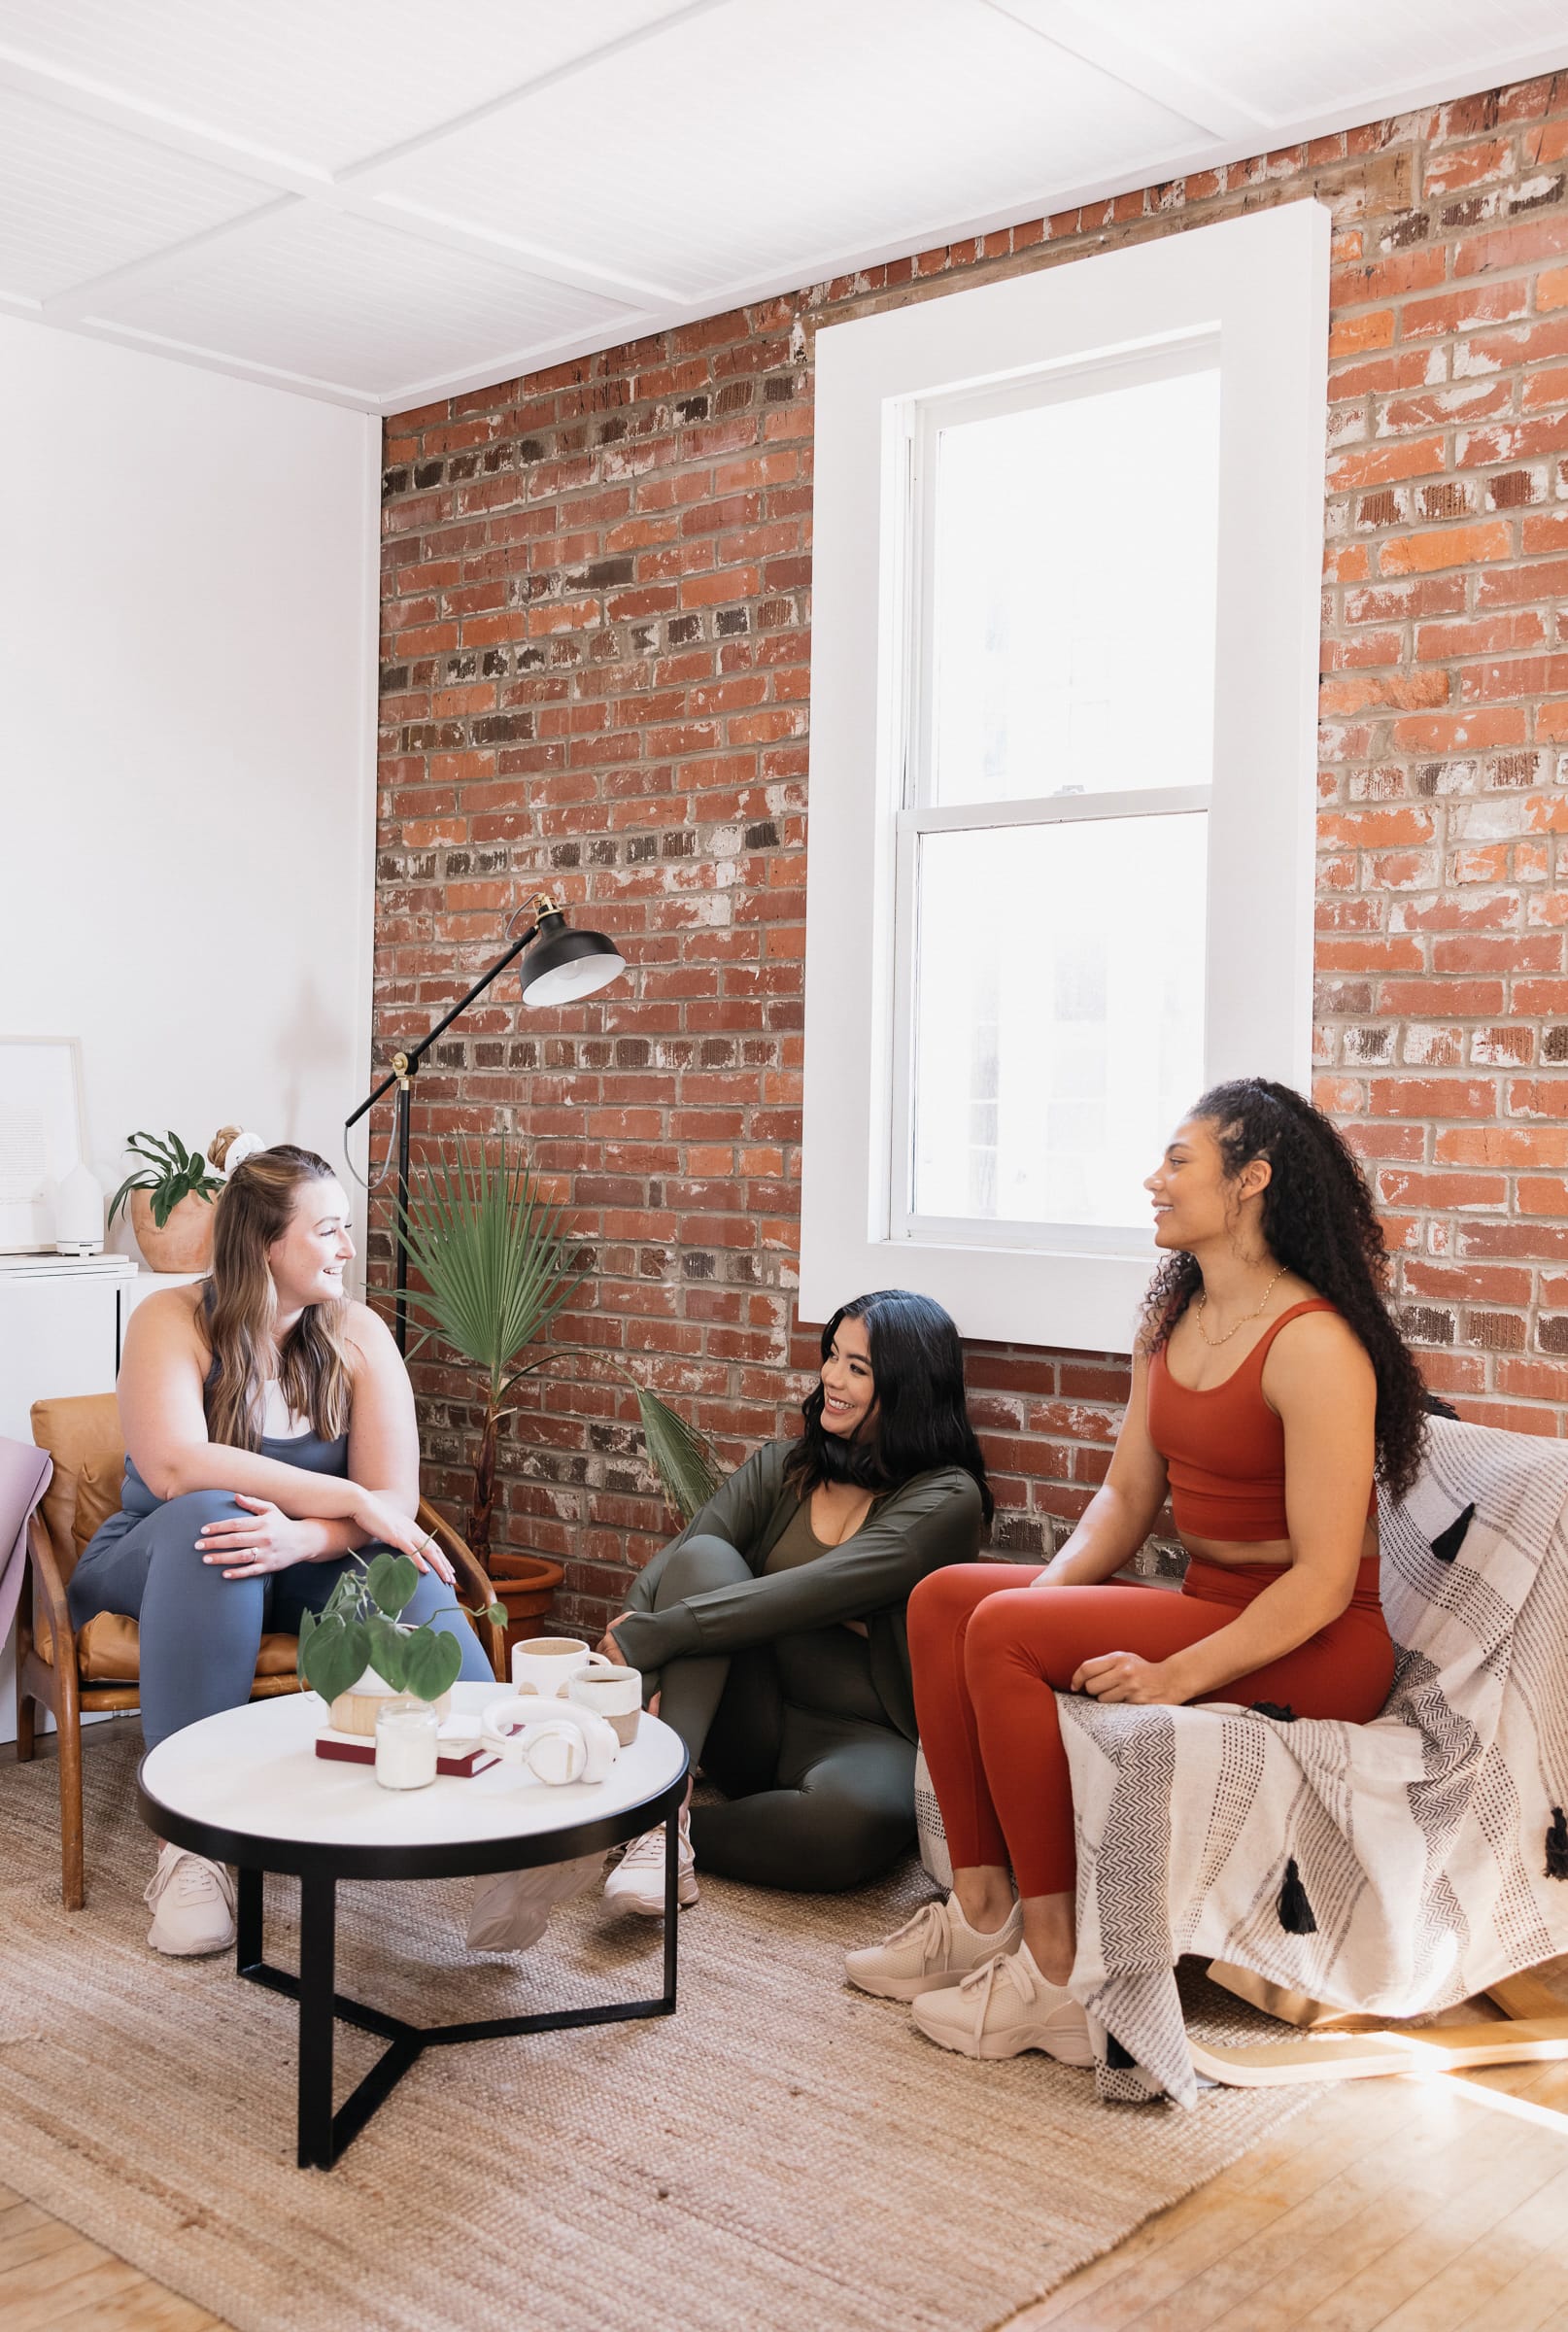 Three female presenting friends sit in varying positions and chat in front of a brick wall with a window in it